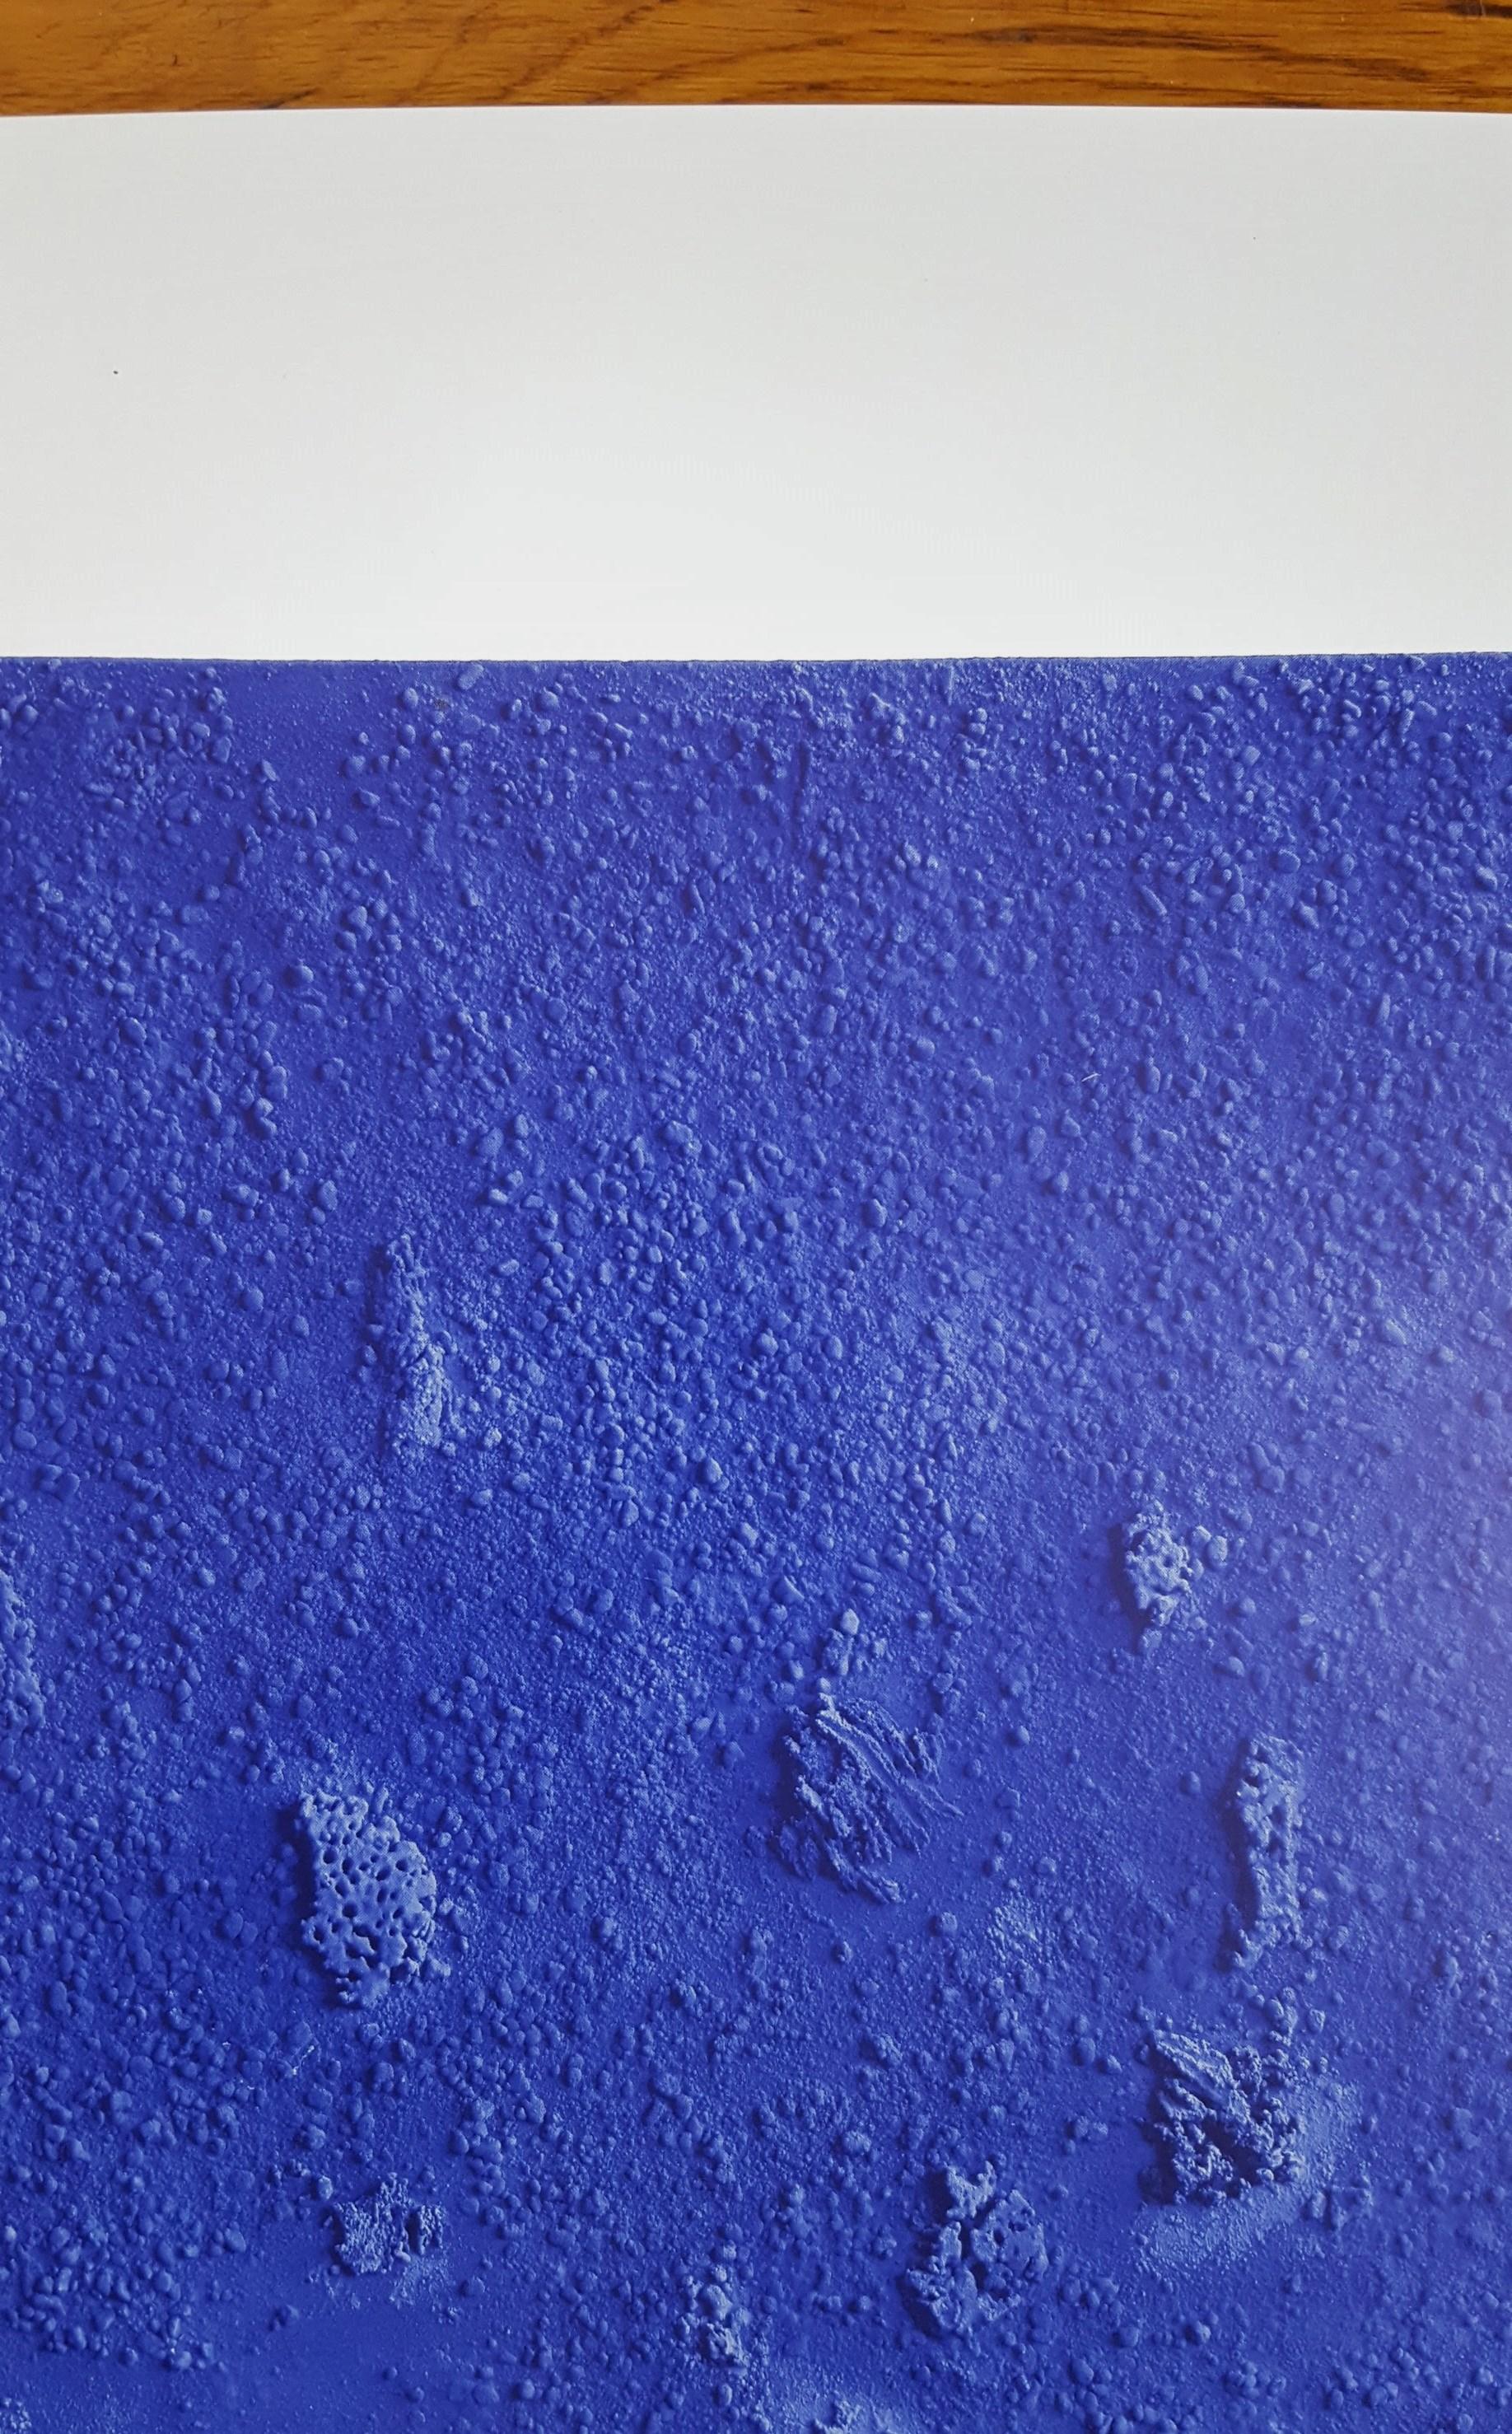 A vintage offset-lithograph poster on heavy poster paper after French artist Yves Klein (1928-1962) titled “RE 19 (Relief Eponge Bleu)”, c. 1990. Published and printed by Mercurius Art Publishing bv, Bruynvisweg 4, 1531 AZ Wormer, Holland.